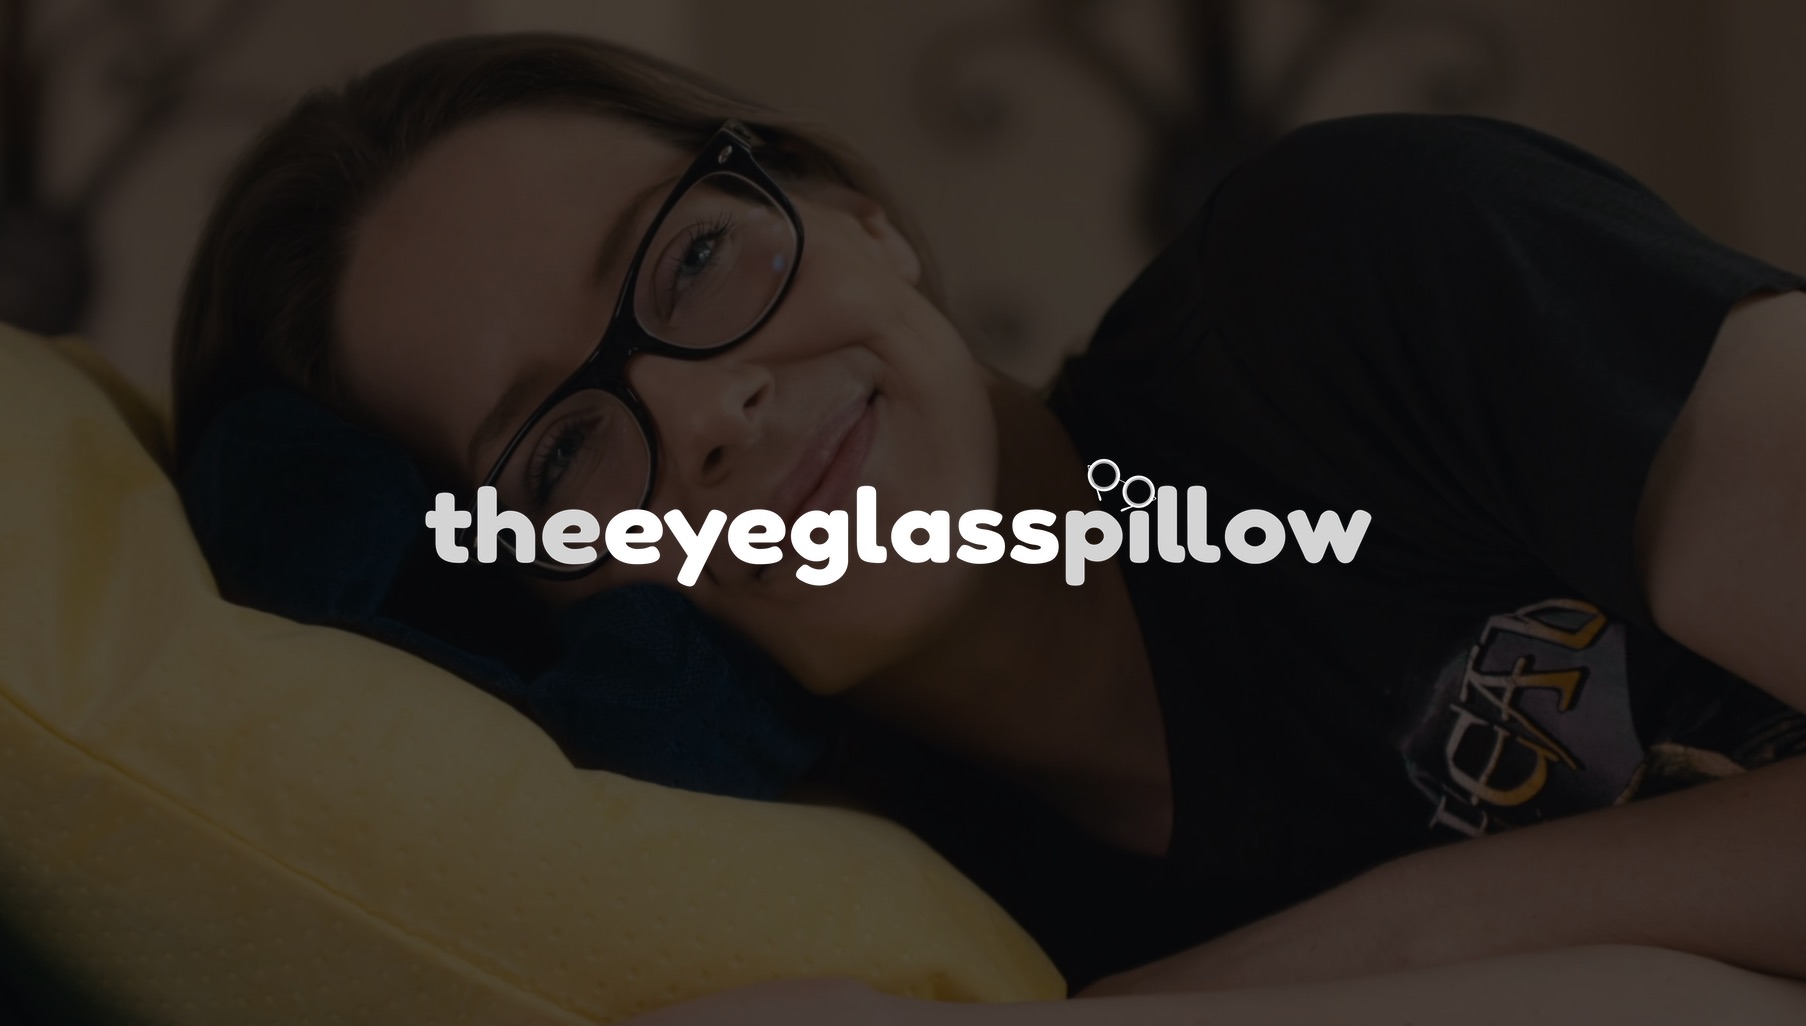 White The Eyeglass Pillow logo by LaySee Pillow with dimmed background of woman wearing black t shirt laying on her side smiling